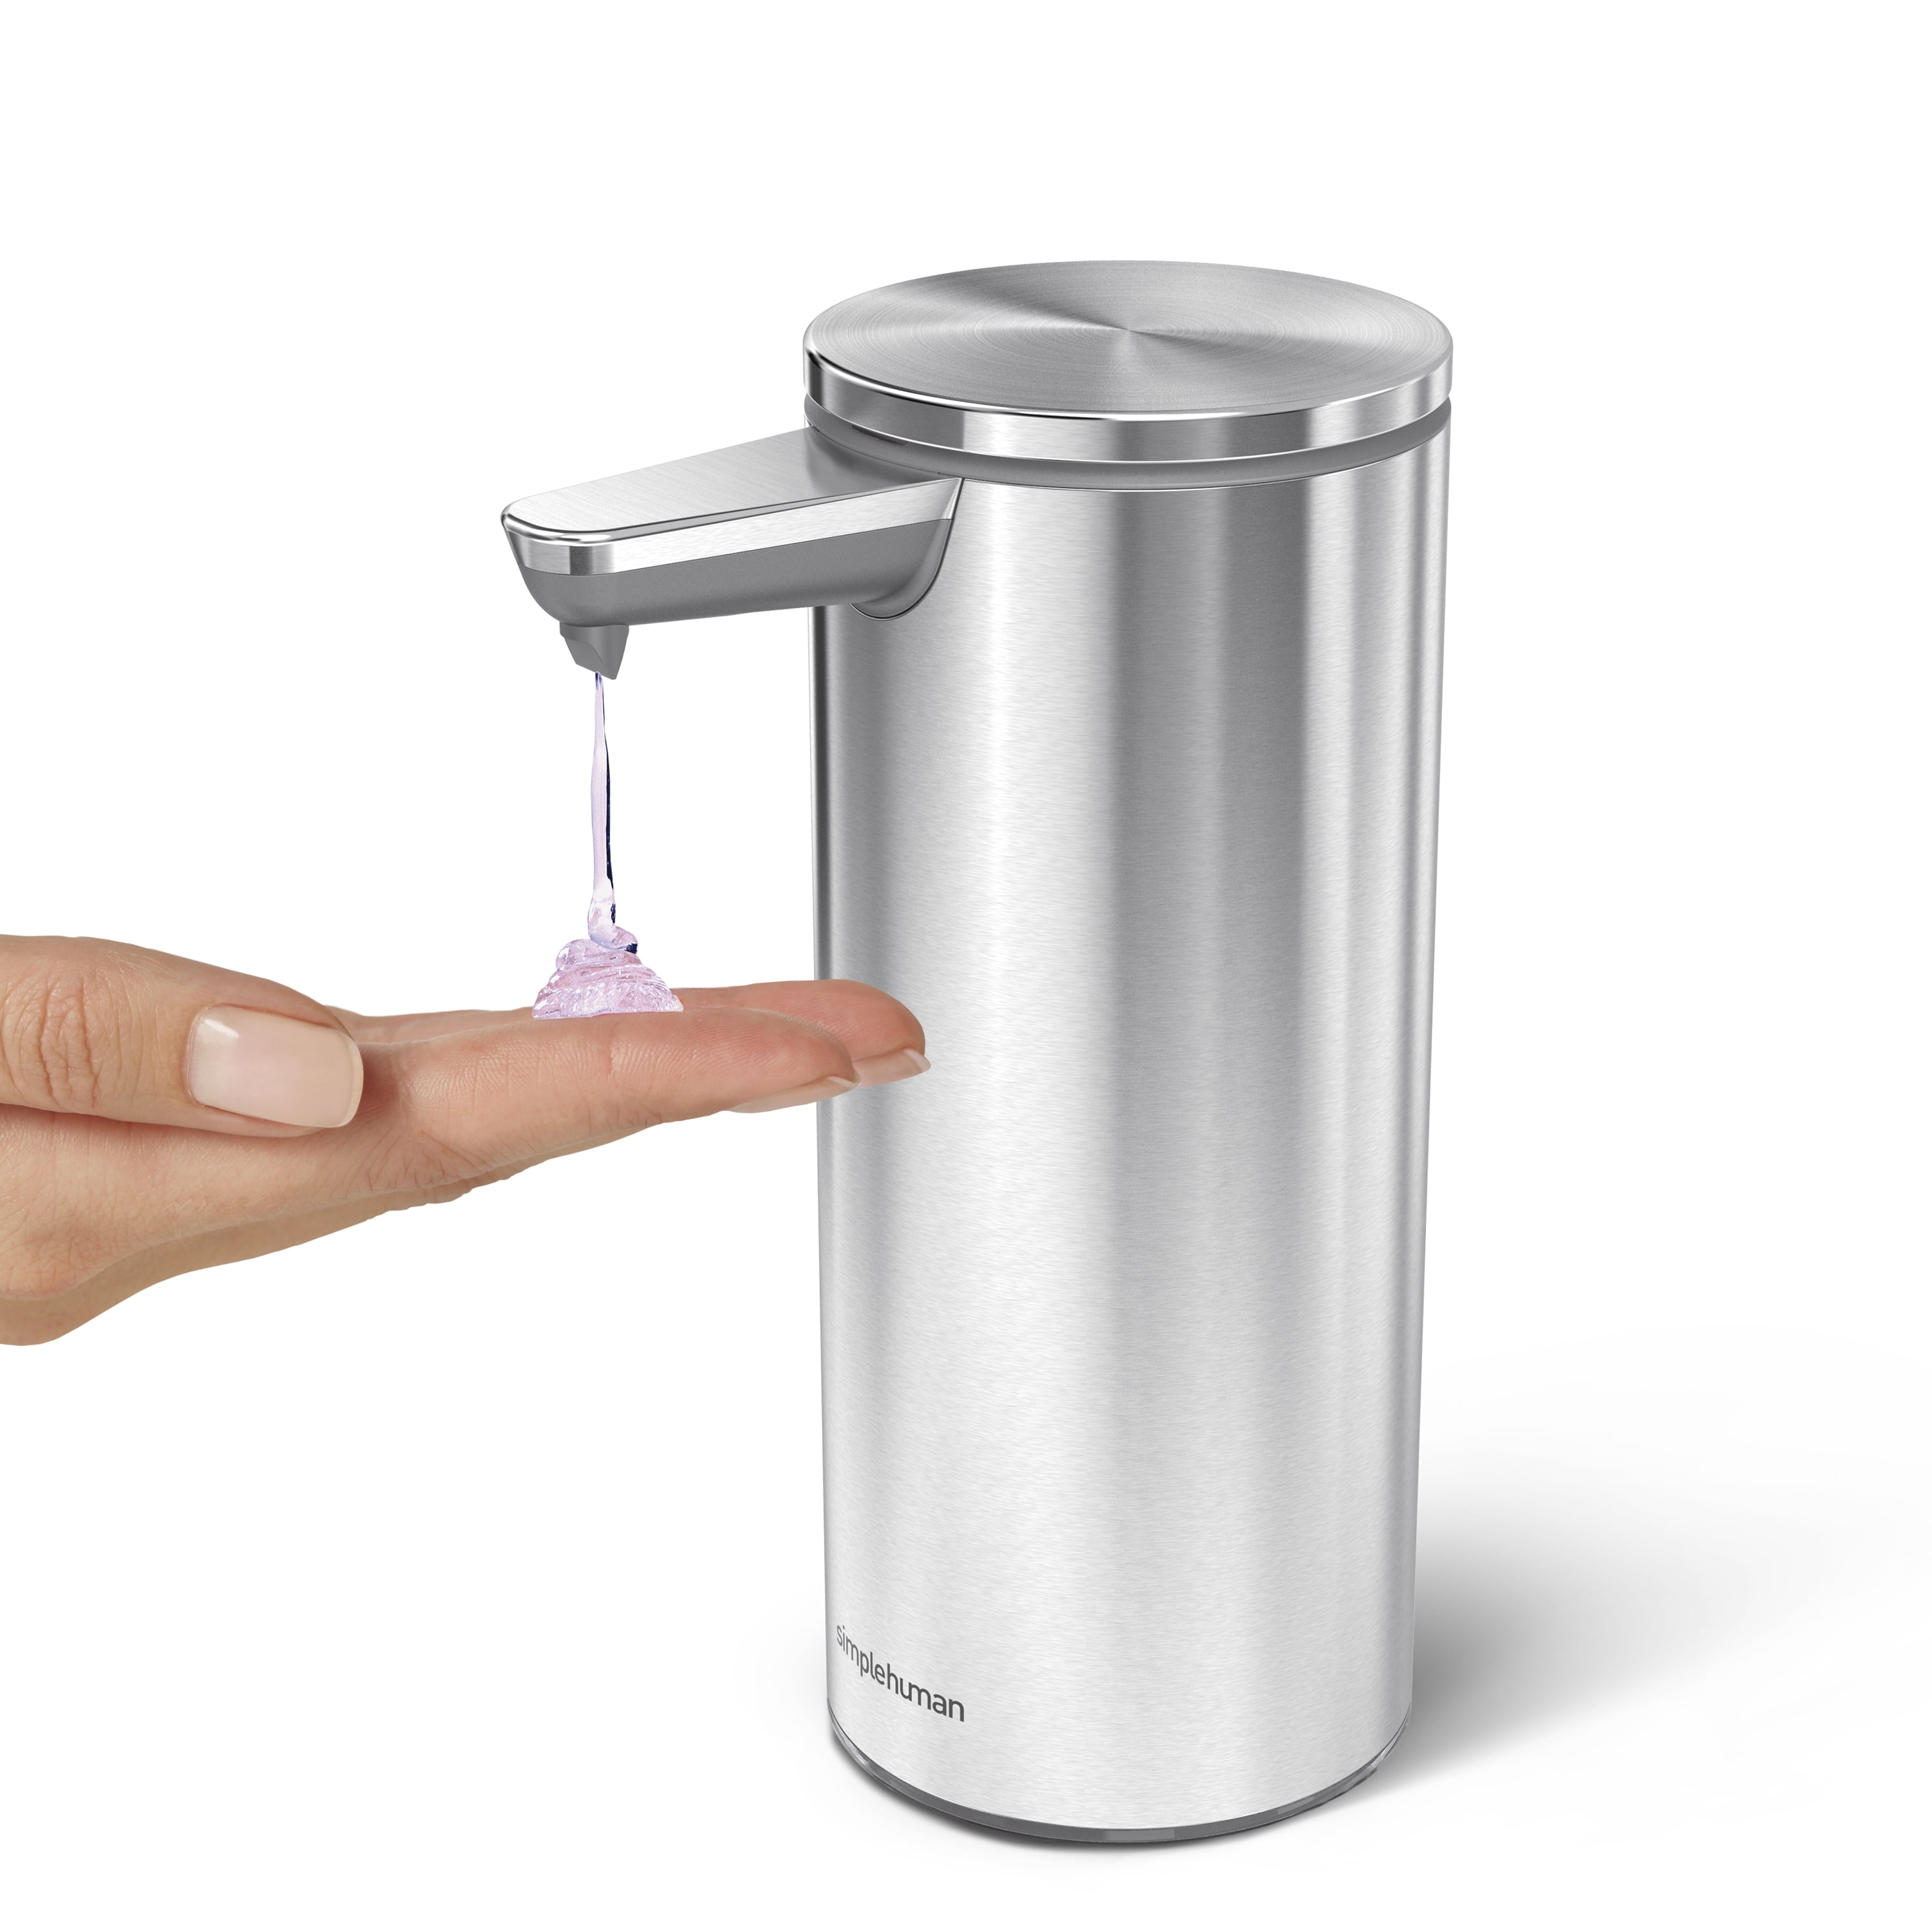 Bring simplehuman's Touch-Free Soap Pump + Caddy home for $50 (Reg